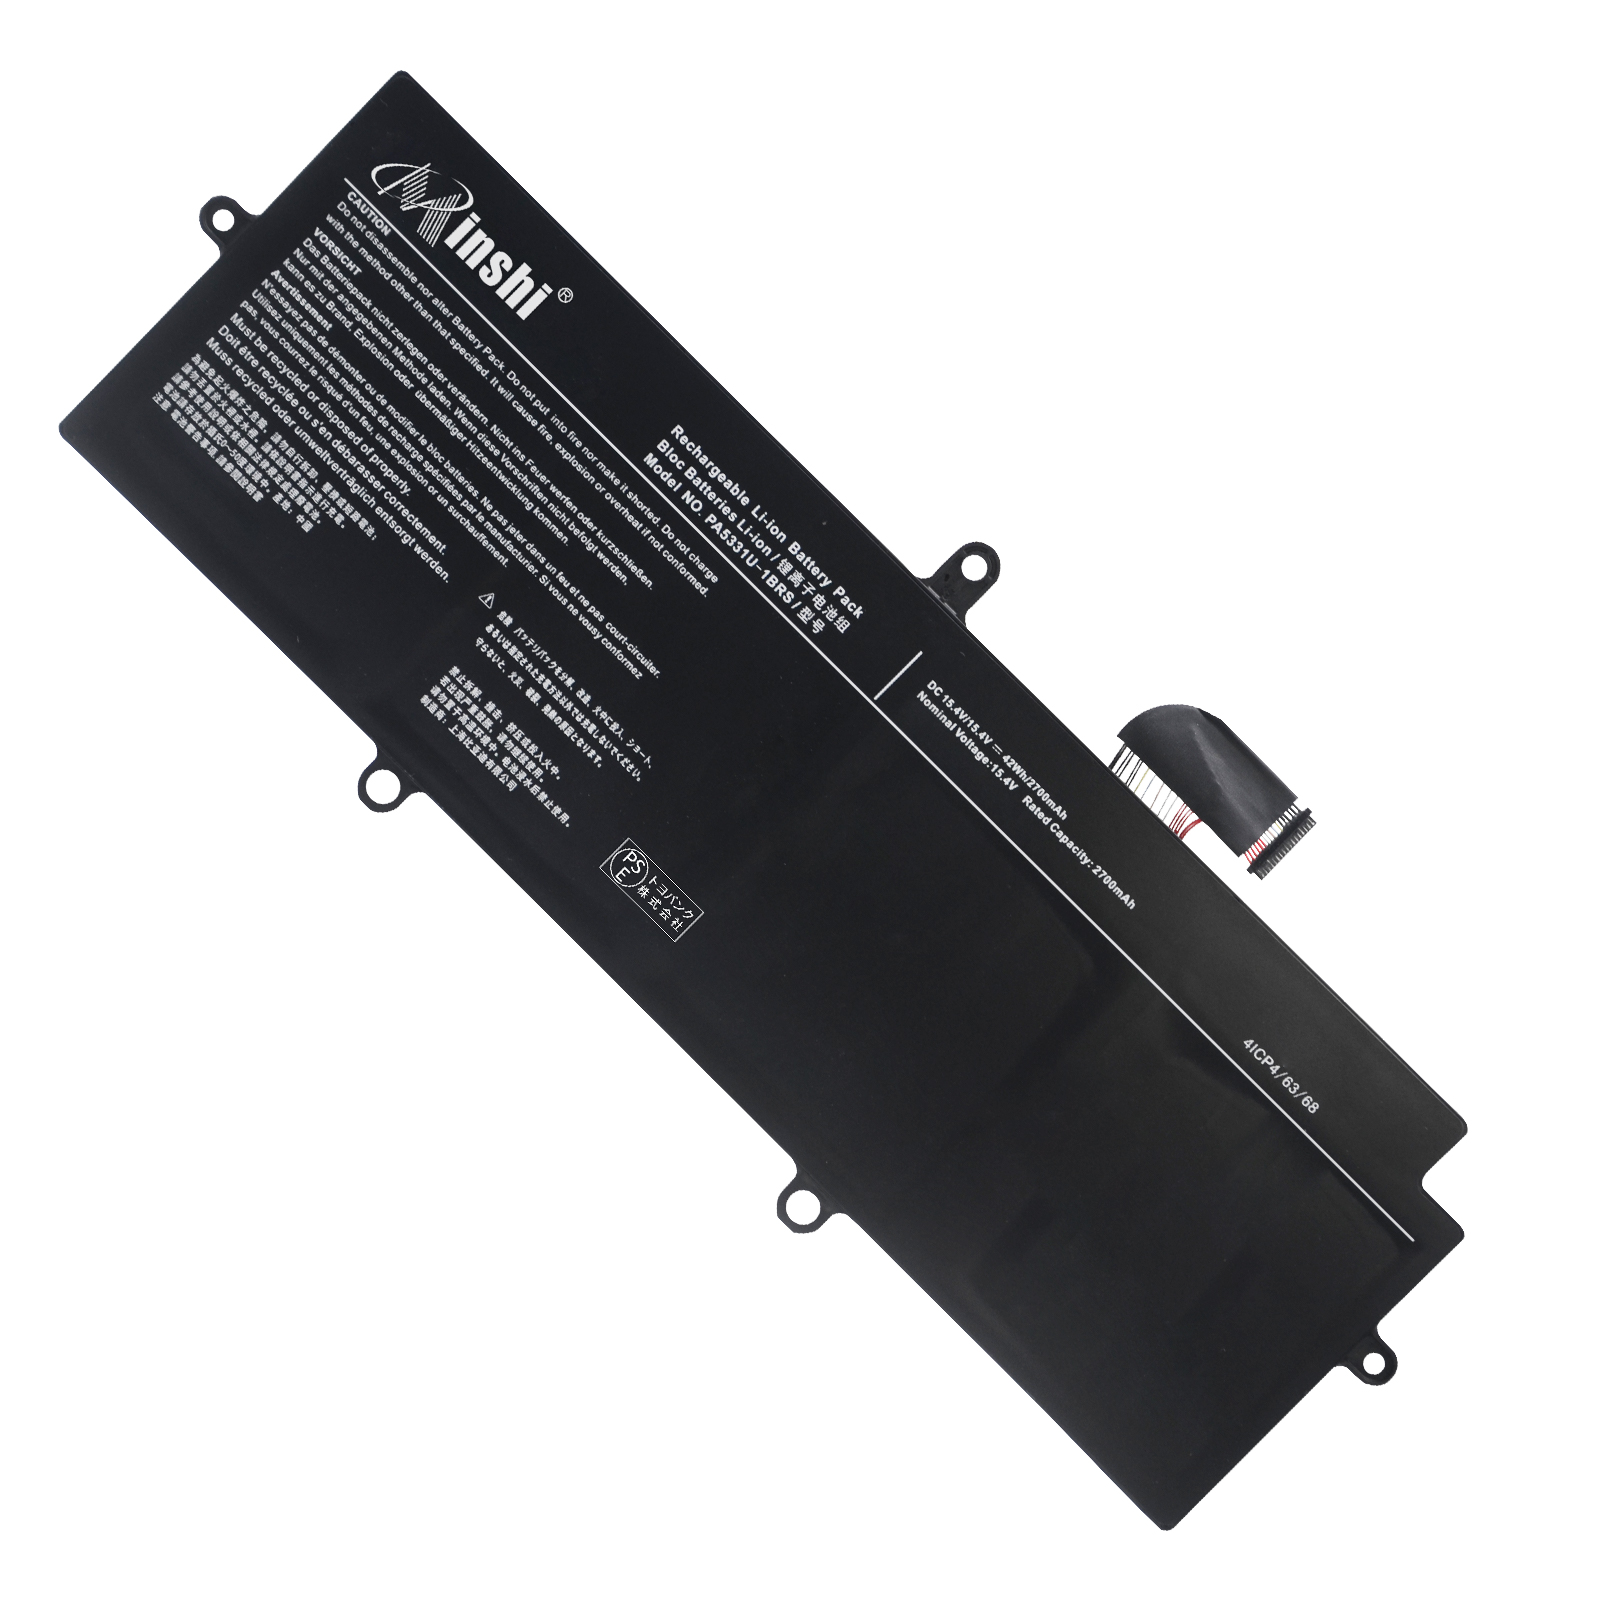  minshi PA5331U-1BRS Portege R30-A 対応 PA5331U-1BRS 2700mAh PSE認定済 交換用バッテリー